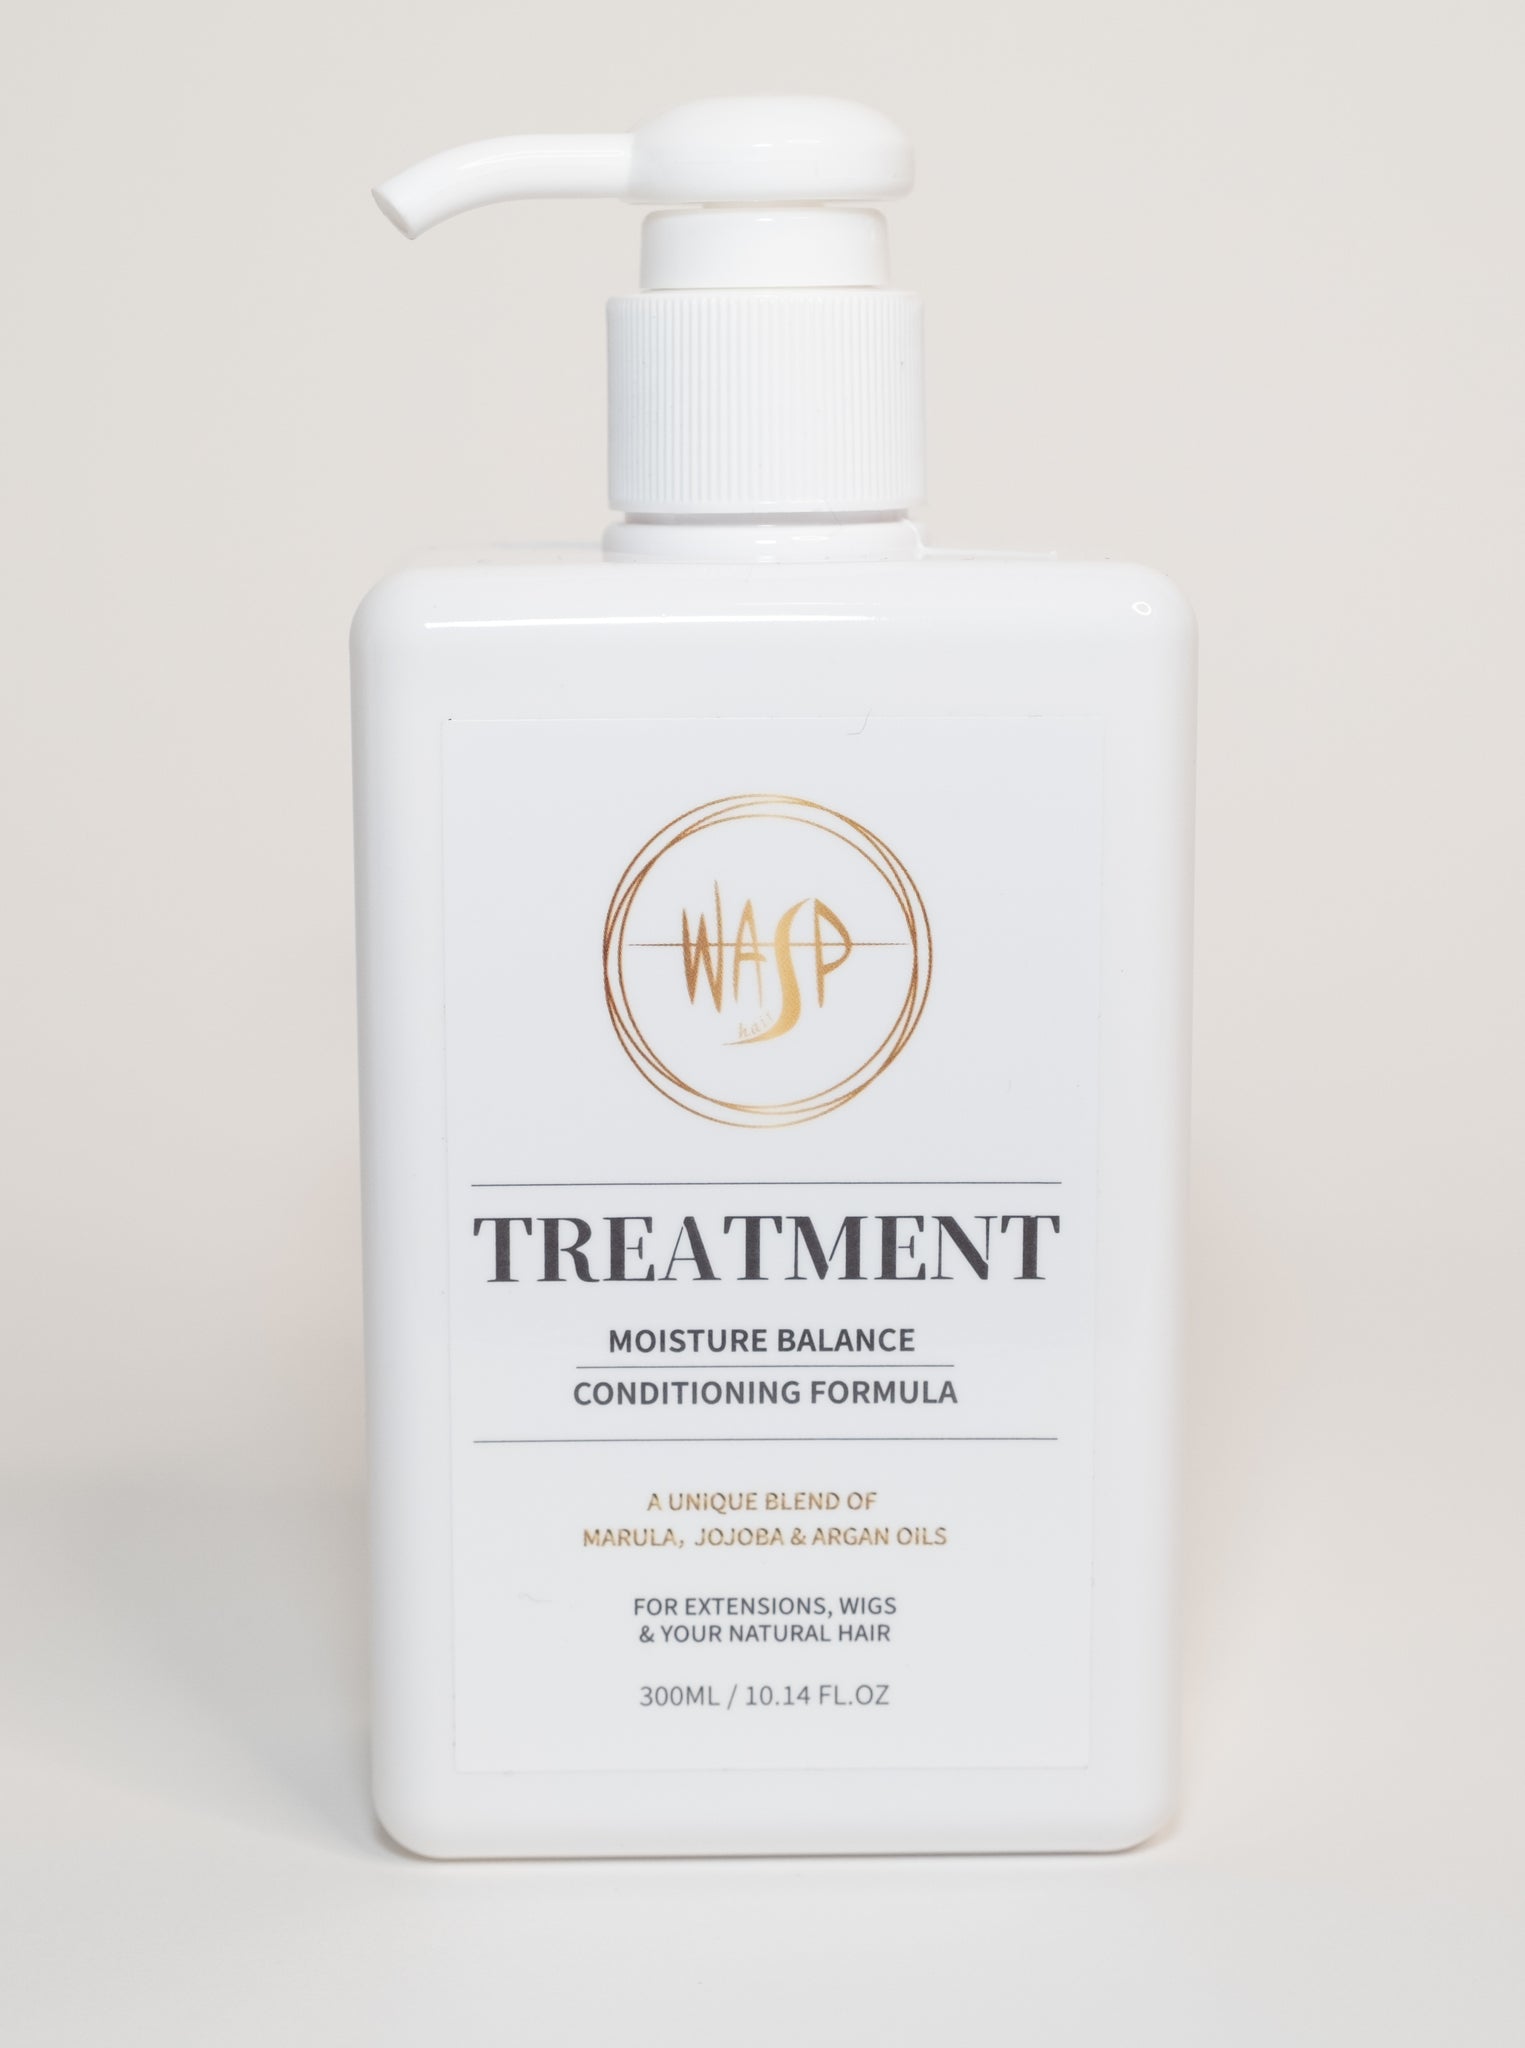 Wasp Treatment For extensions,wigs&your natural hair(300ml/150ml)